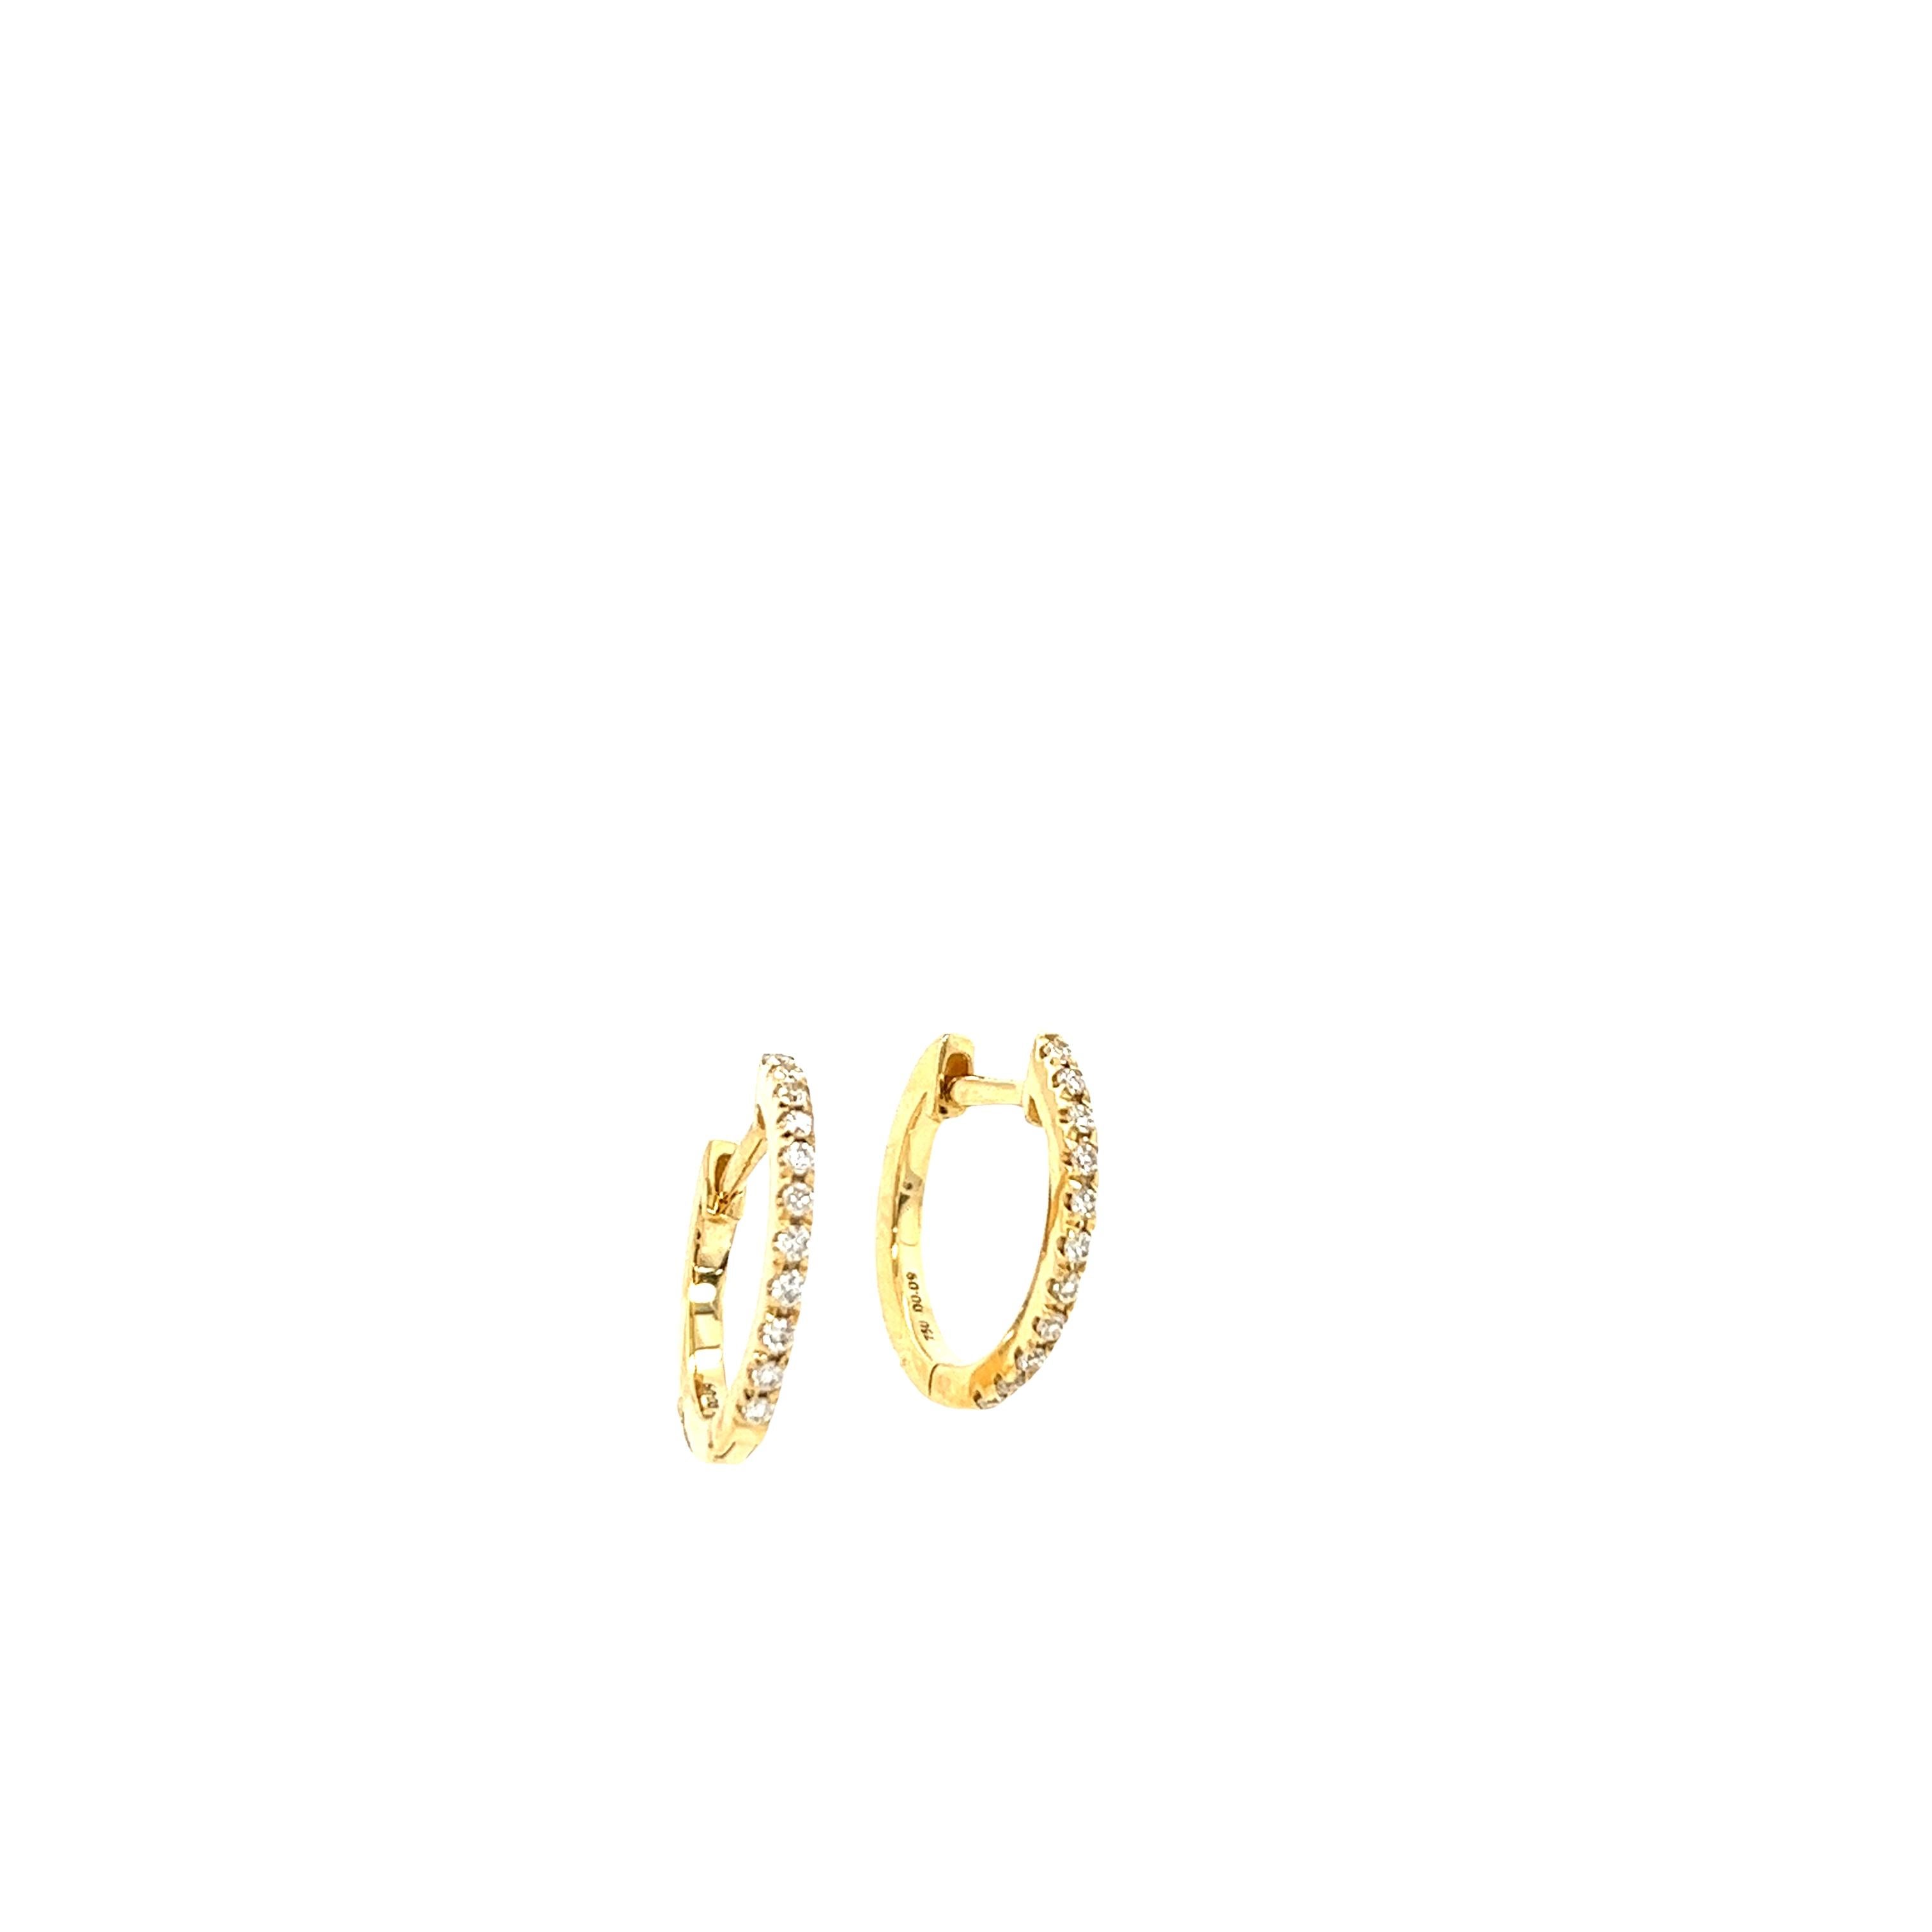 18ct Yellow Gold Diamond Hoop Earrings, Set With 0.09ct Of Round Diamonds, 11mm In New Condition For Sale In London, GB